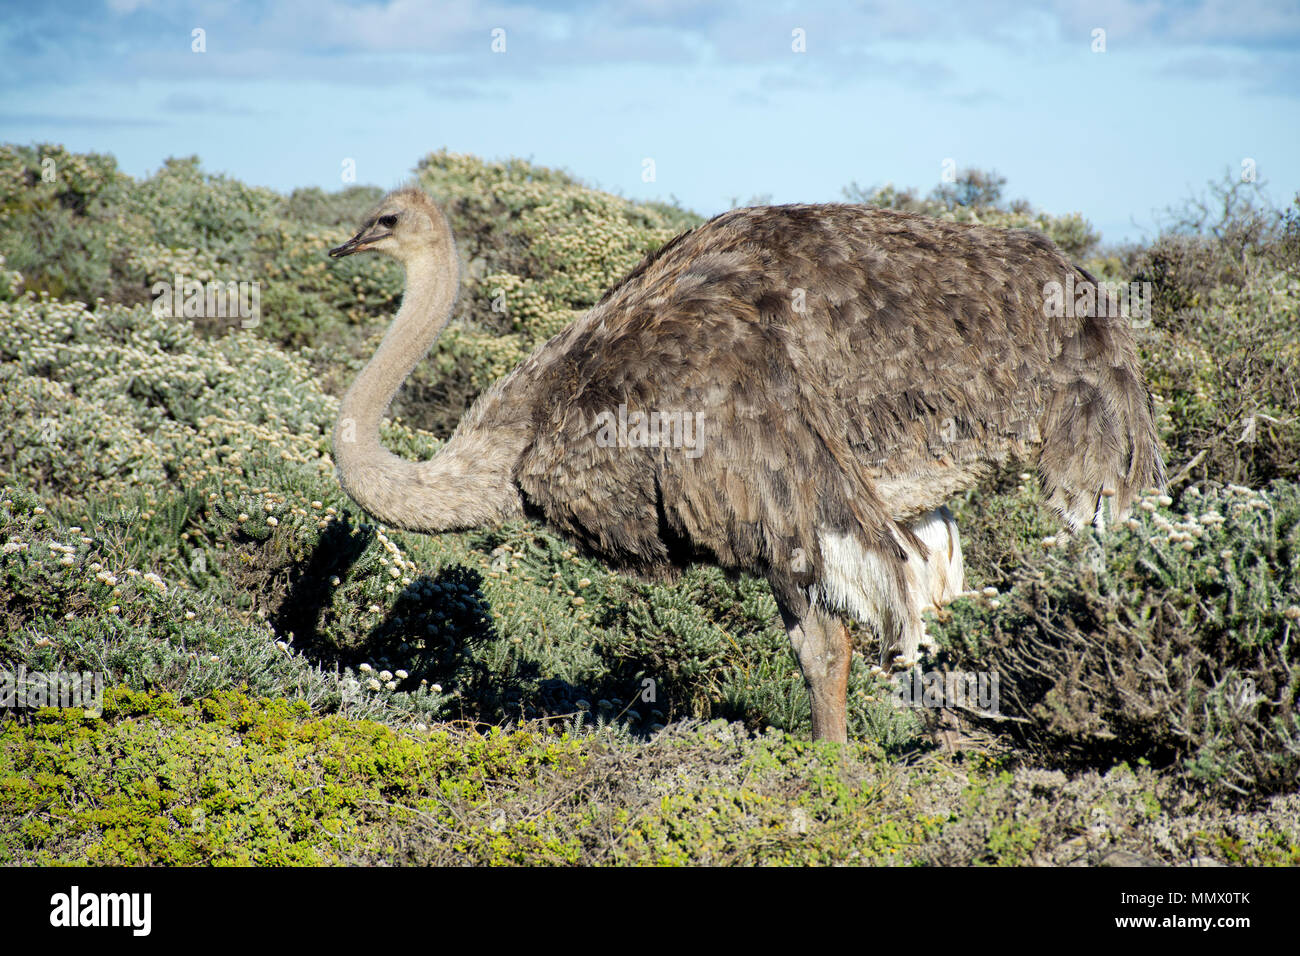 Wild common ostrich, Struthio camelus, roaming around the Cape of Good Hope coastline, Cape Town, South Africa Stock Photo